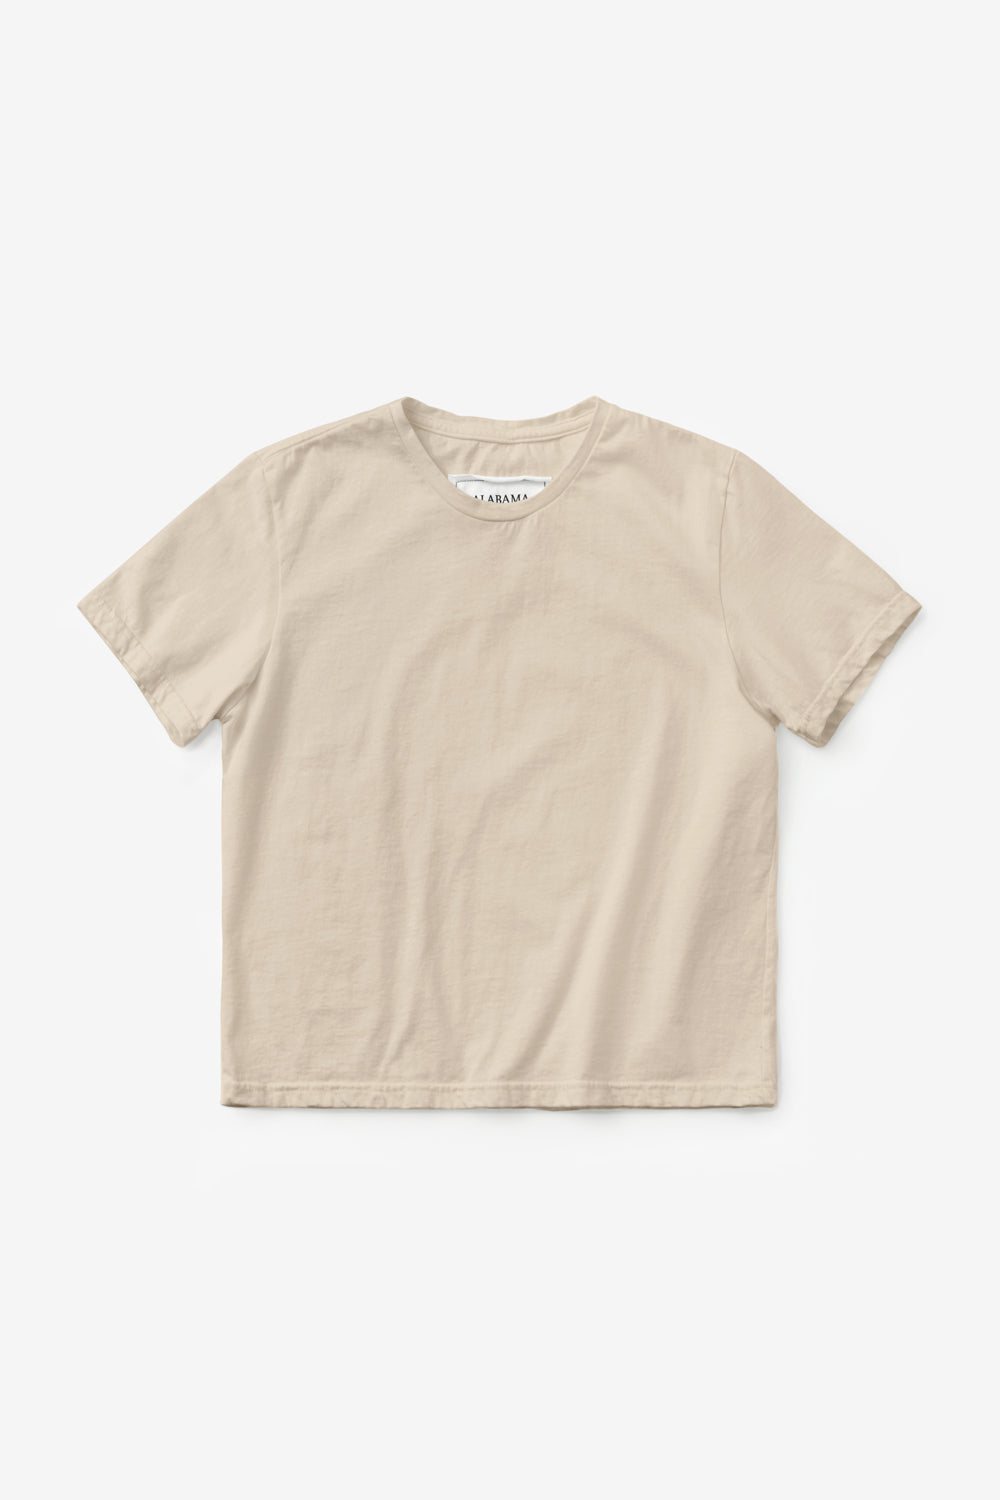 Alabama Chanin Boxy Tee relaxed fit made from soft knit jersey in wax.